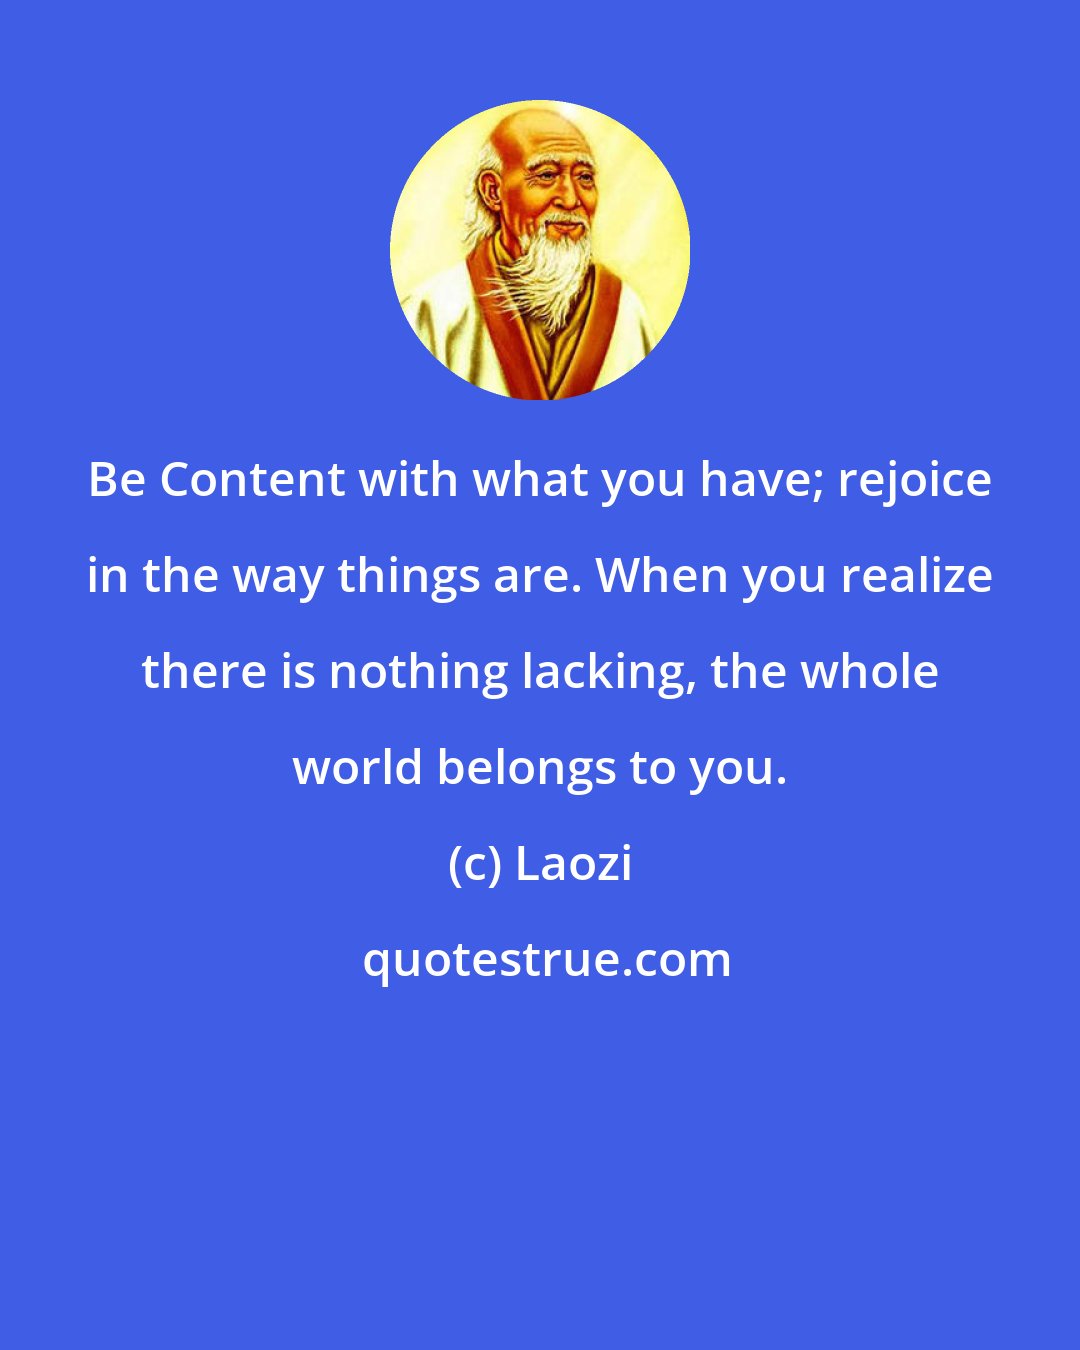 Laozi: Be Content with what you have; rejoice in the way things are. When you realize there is nothing lacking, the whole world belongs to you.